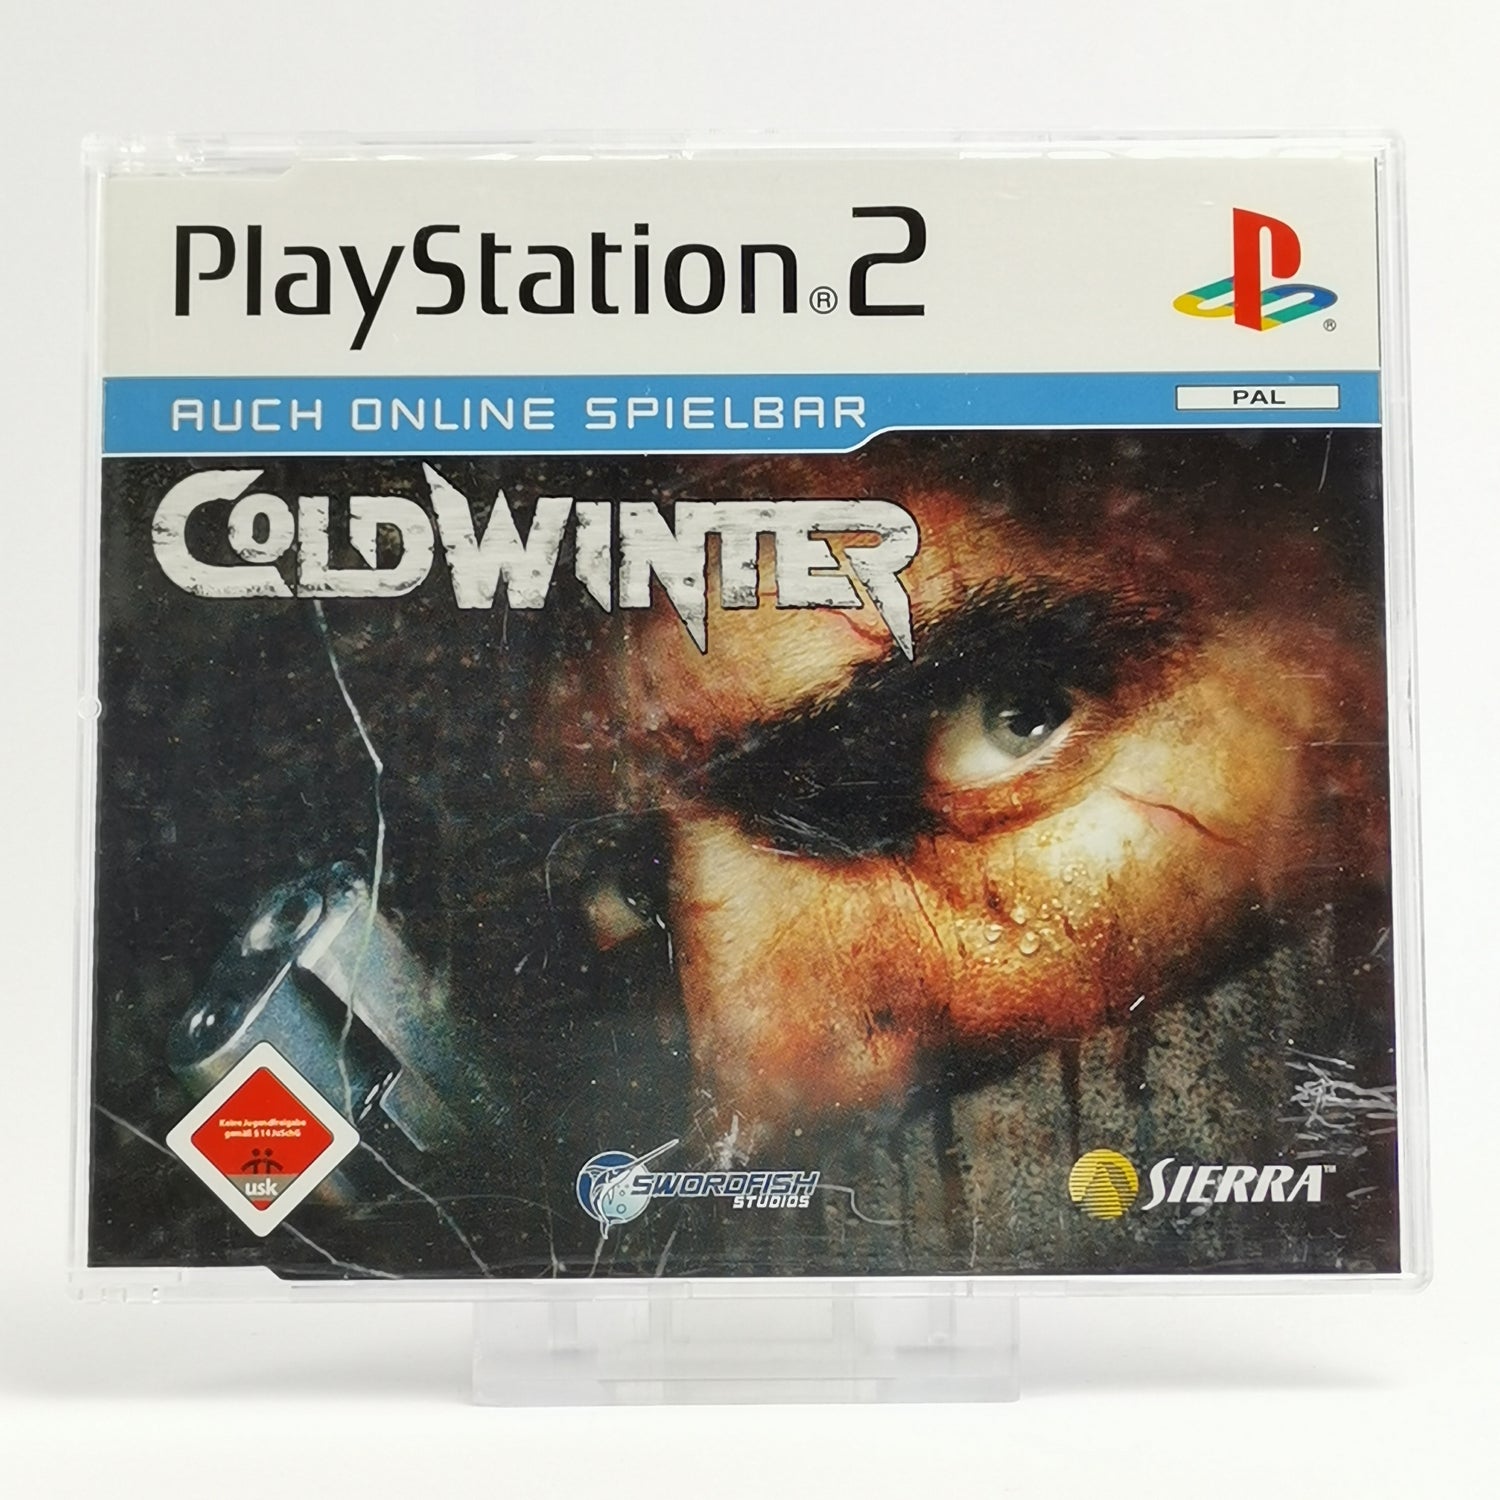 Sony Playstation 2 Promo Game: Cold Winter - Full Version USK18 | PS2 OVP PAL